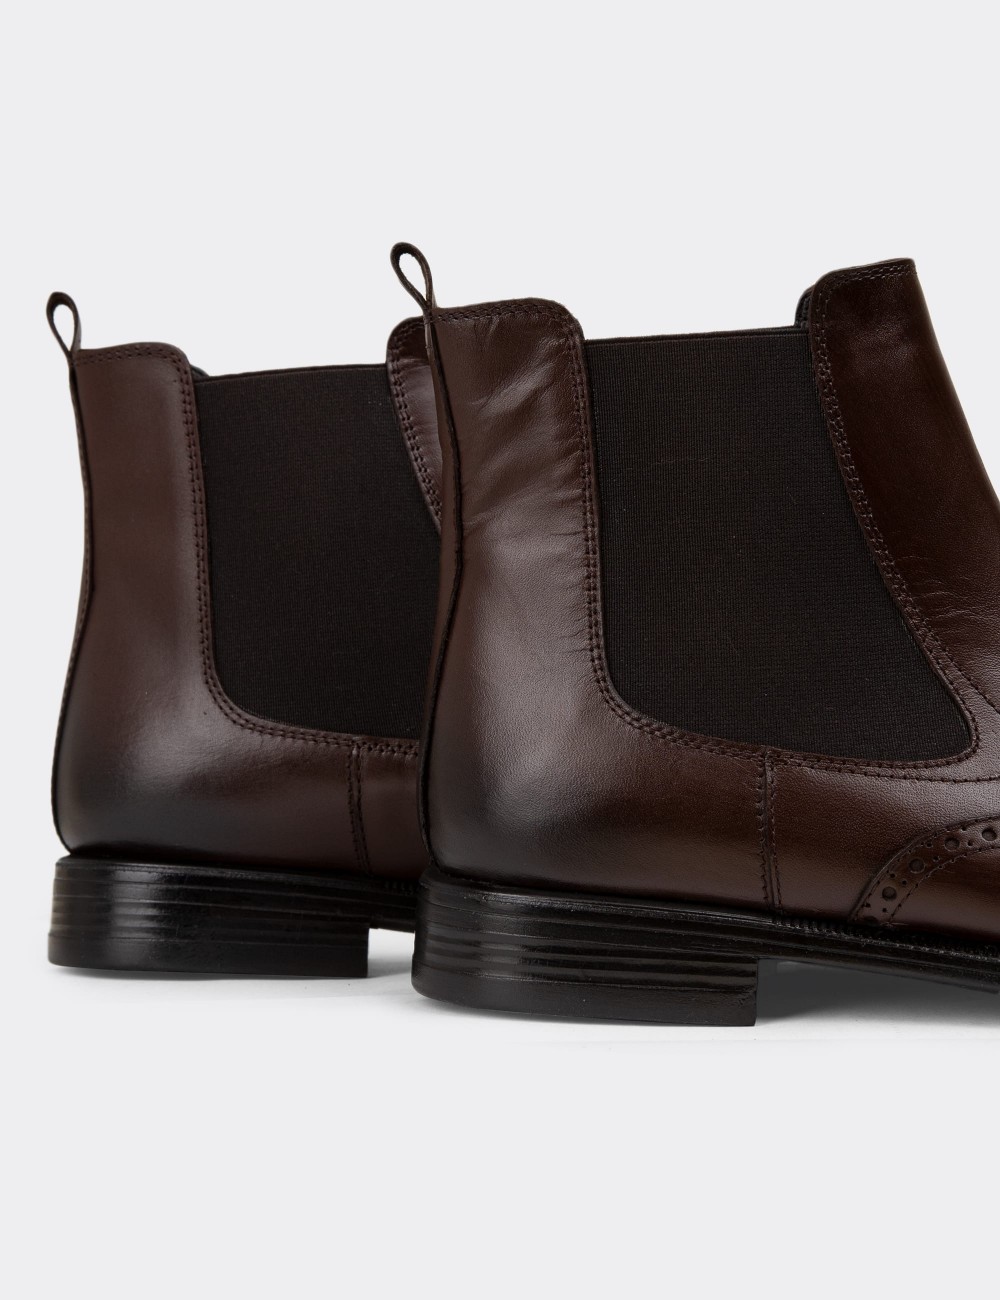 Brown Leather Chelsea Boots - 01920MKHVC01